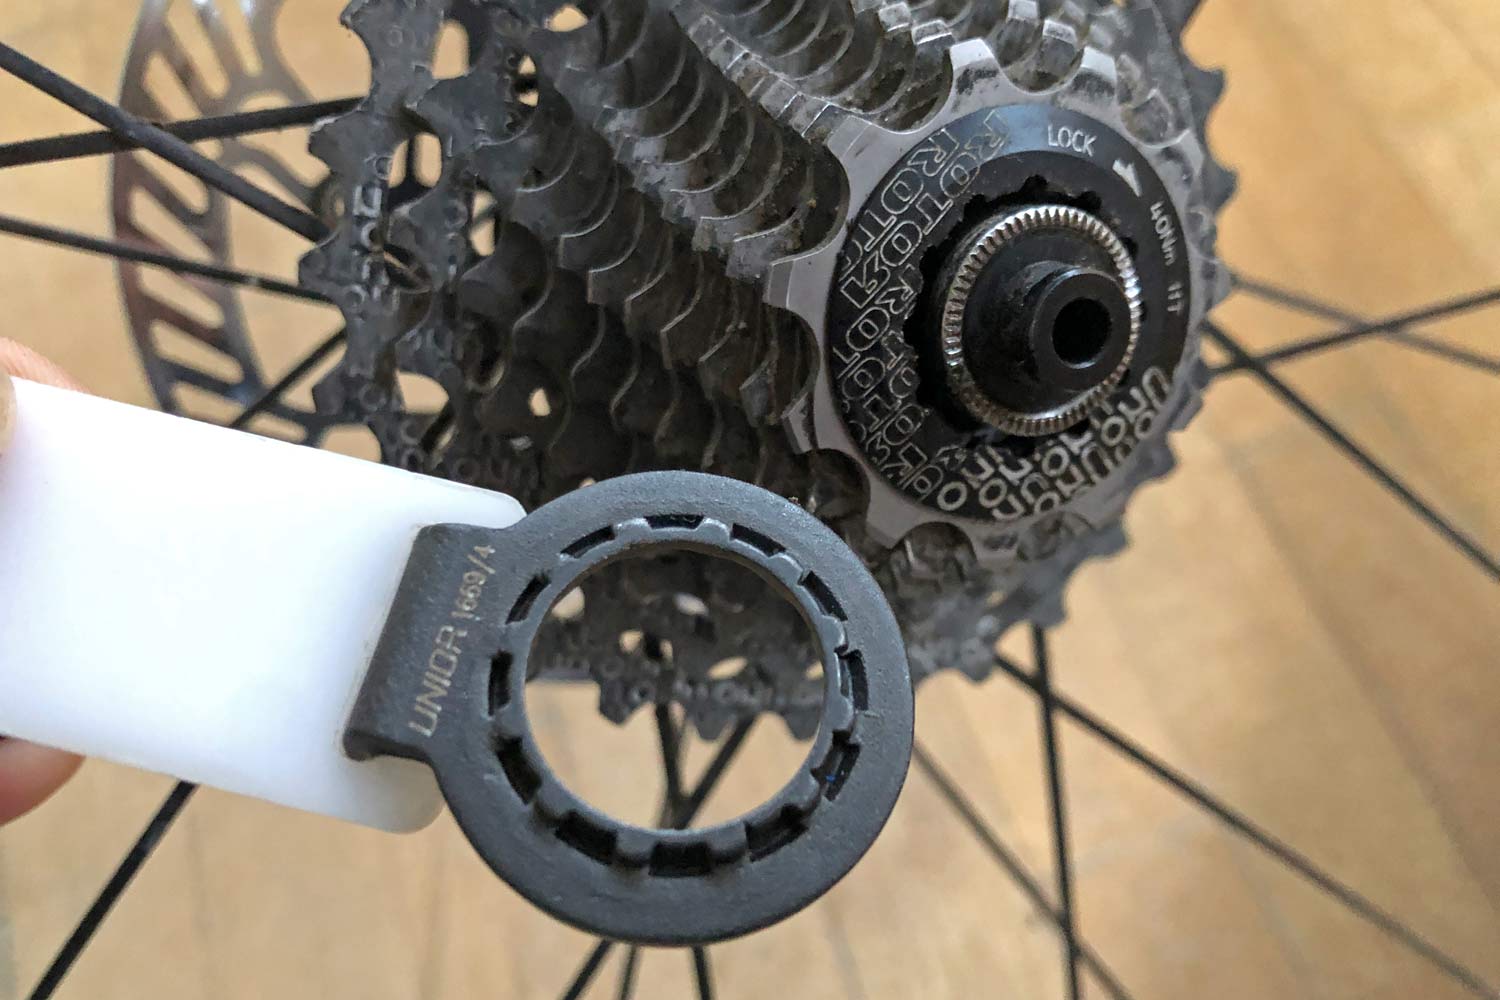 how tight should cassette lockring be